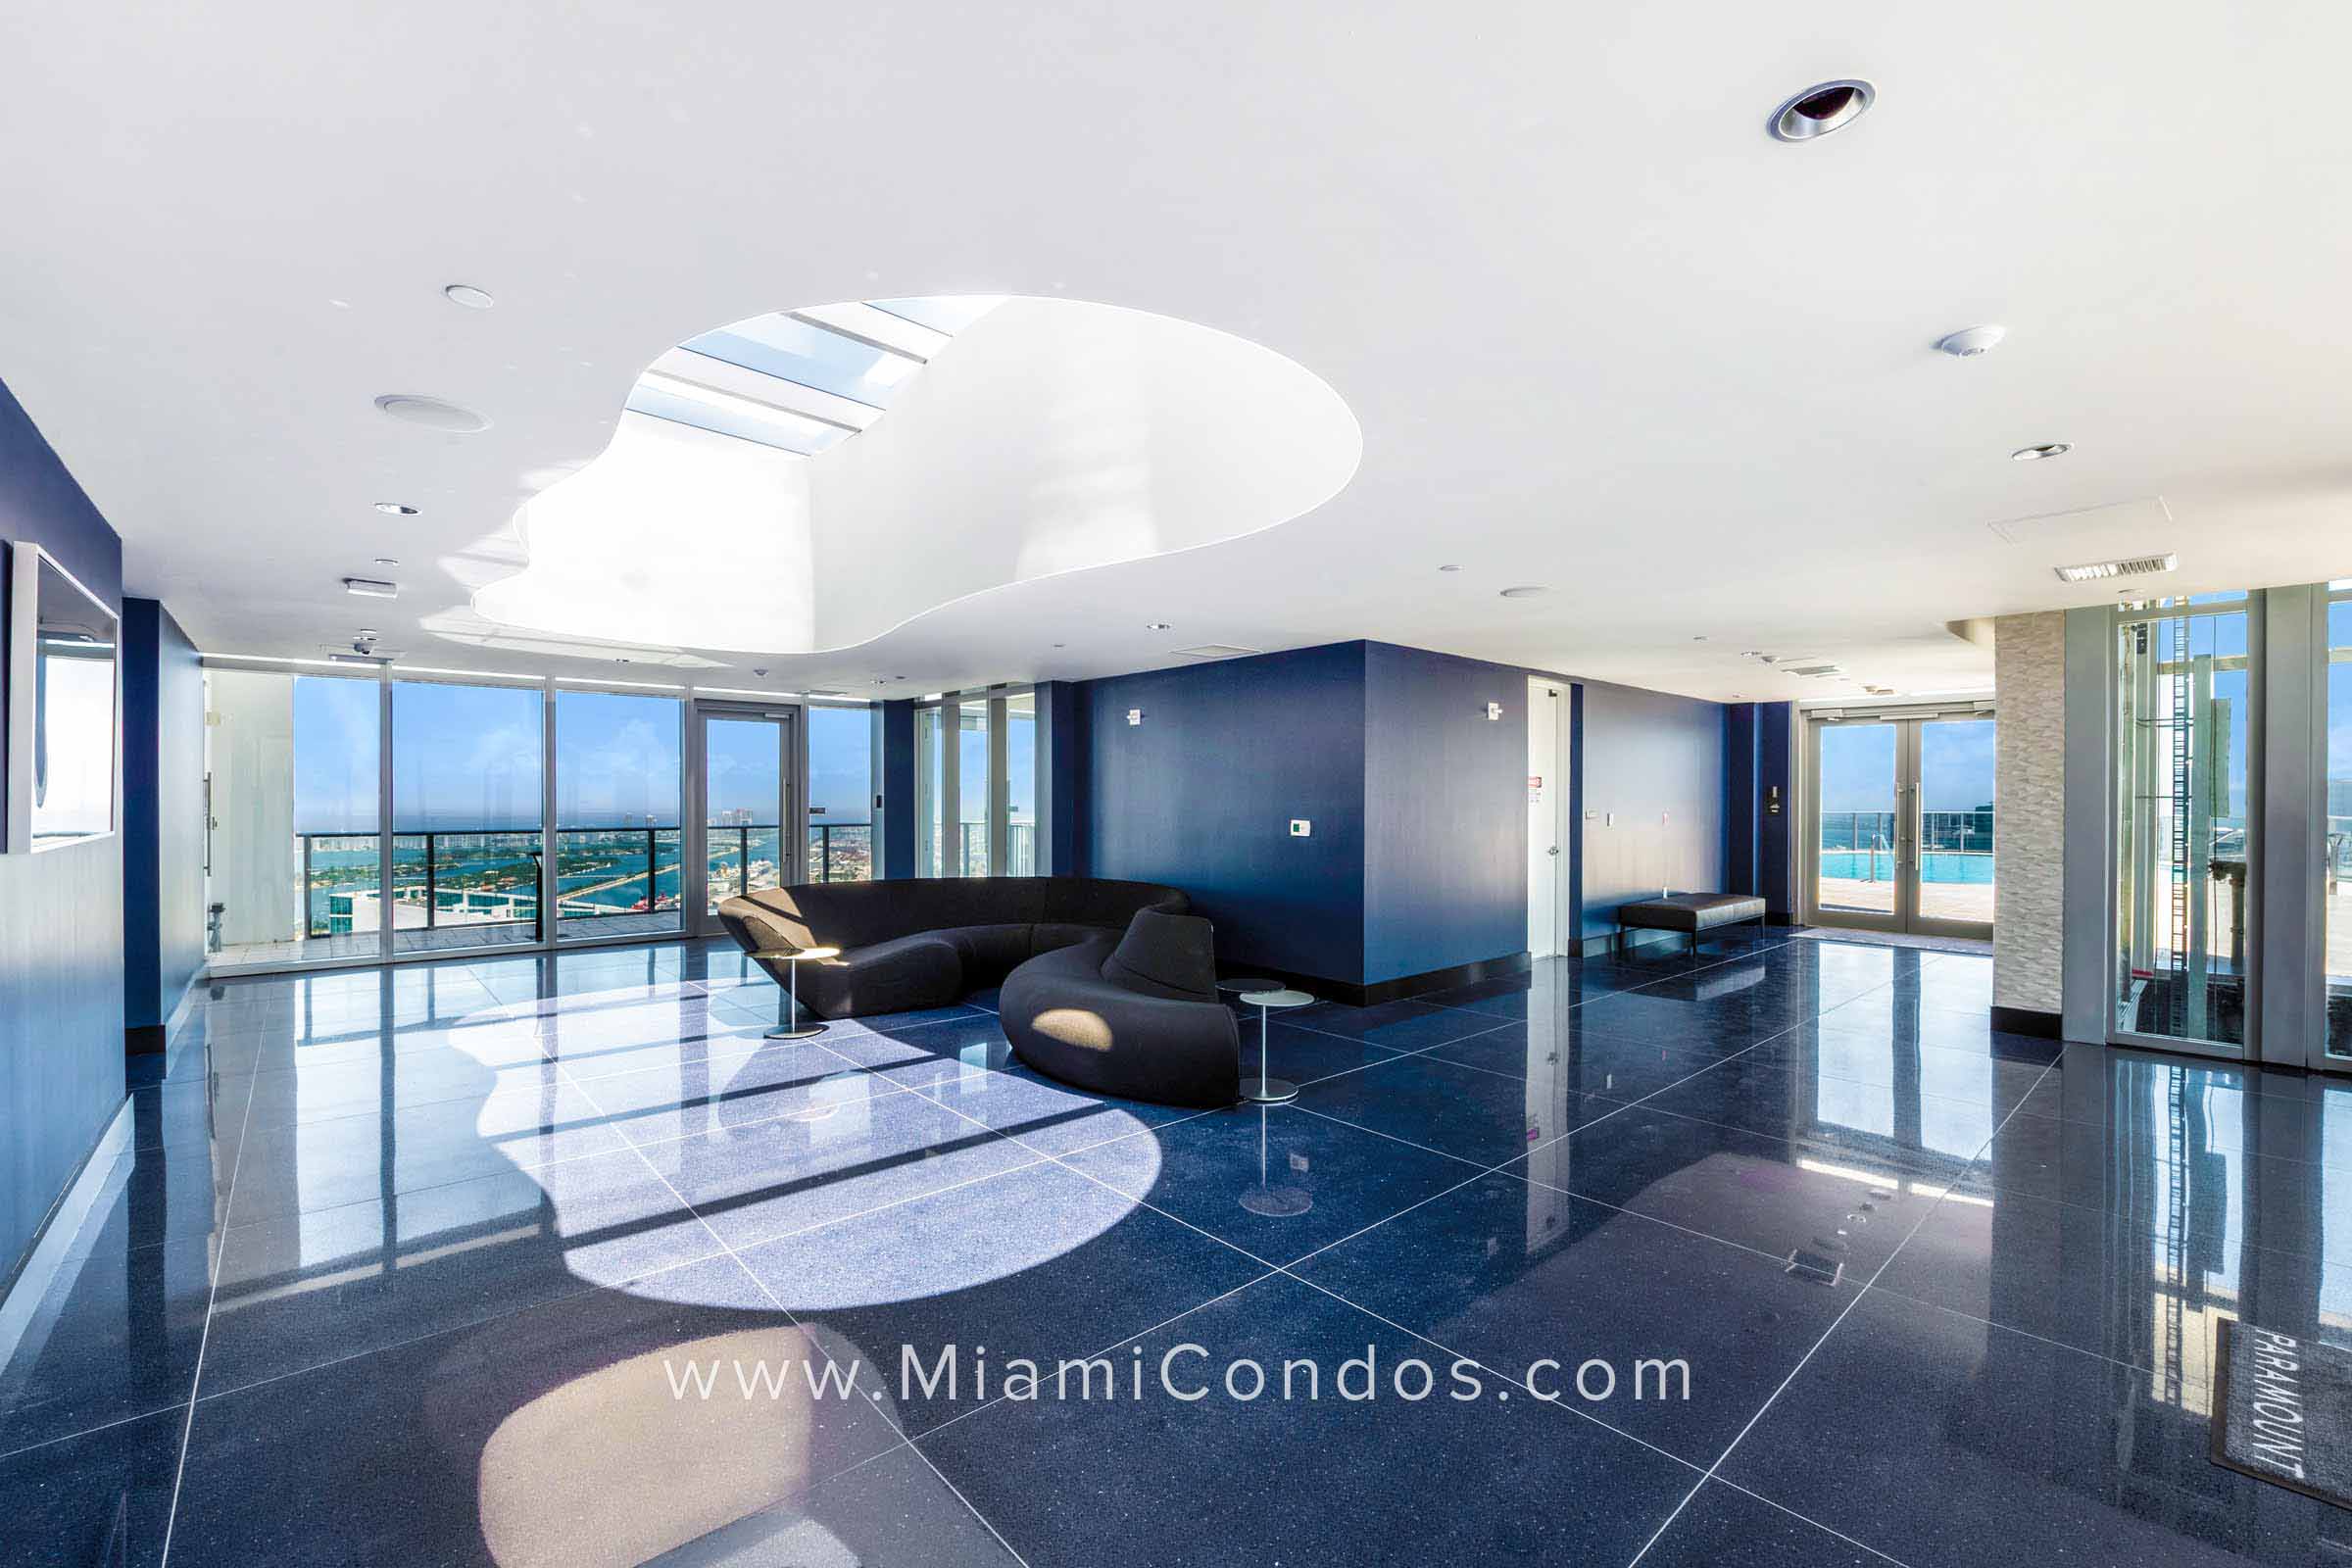 Paramount Miami Worldcenter Rooftop Lobby